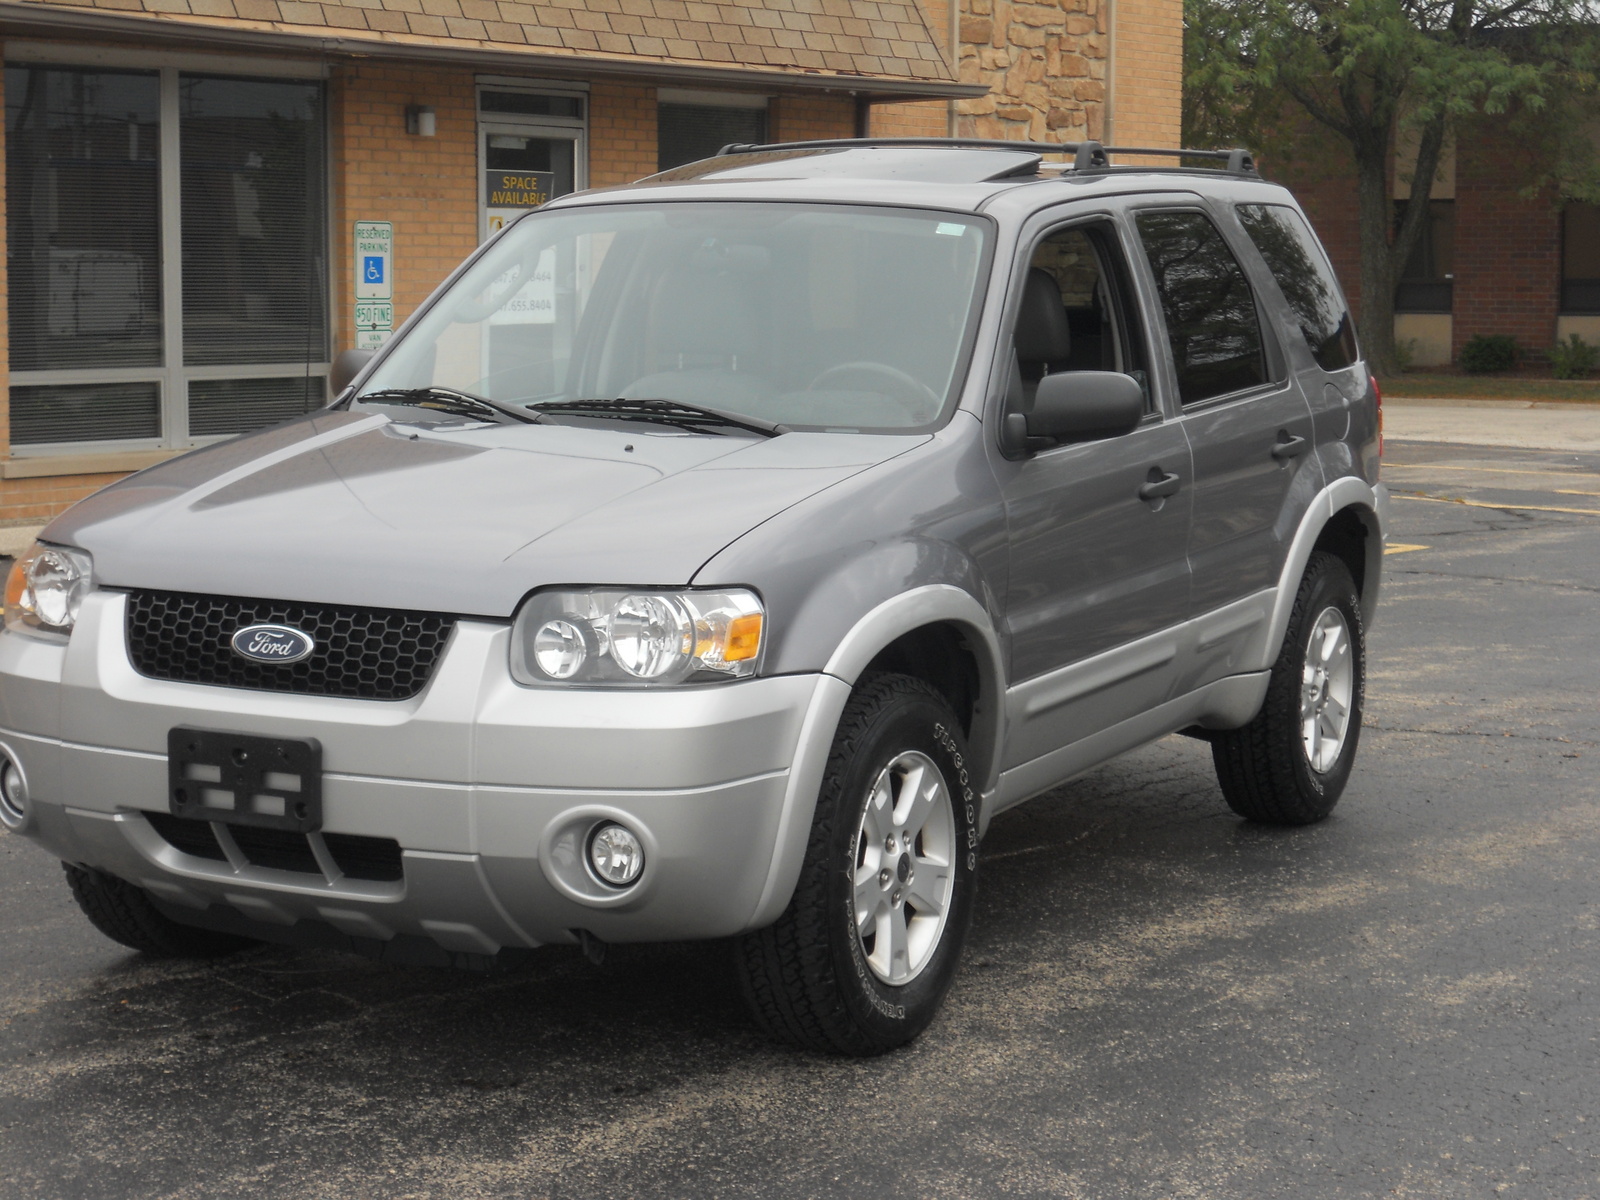 2007 Ford escape xlt safety rating #10